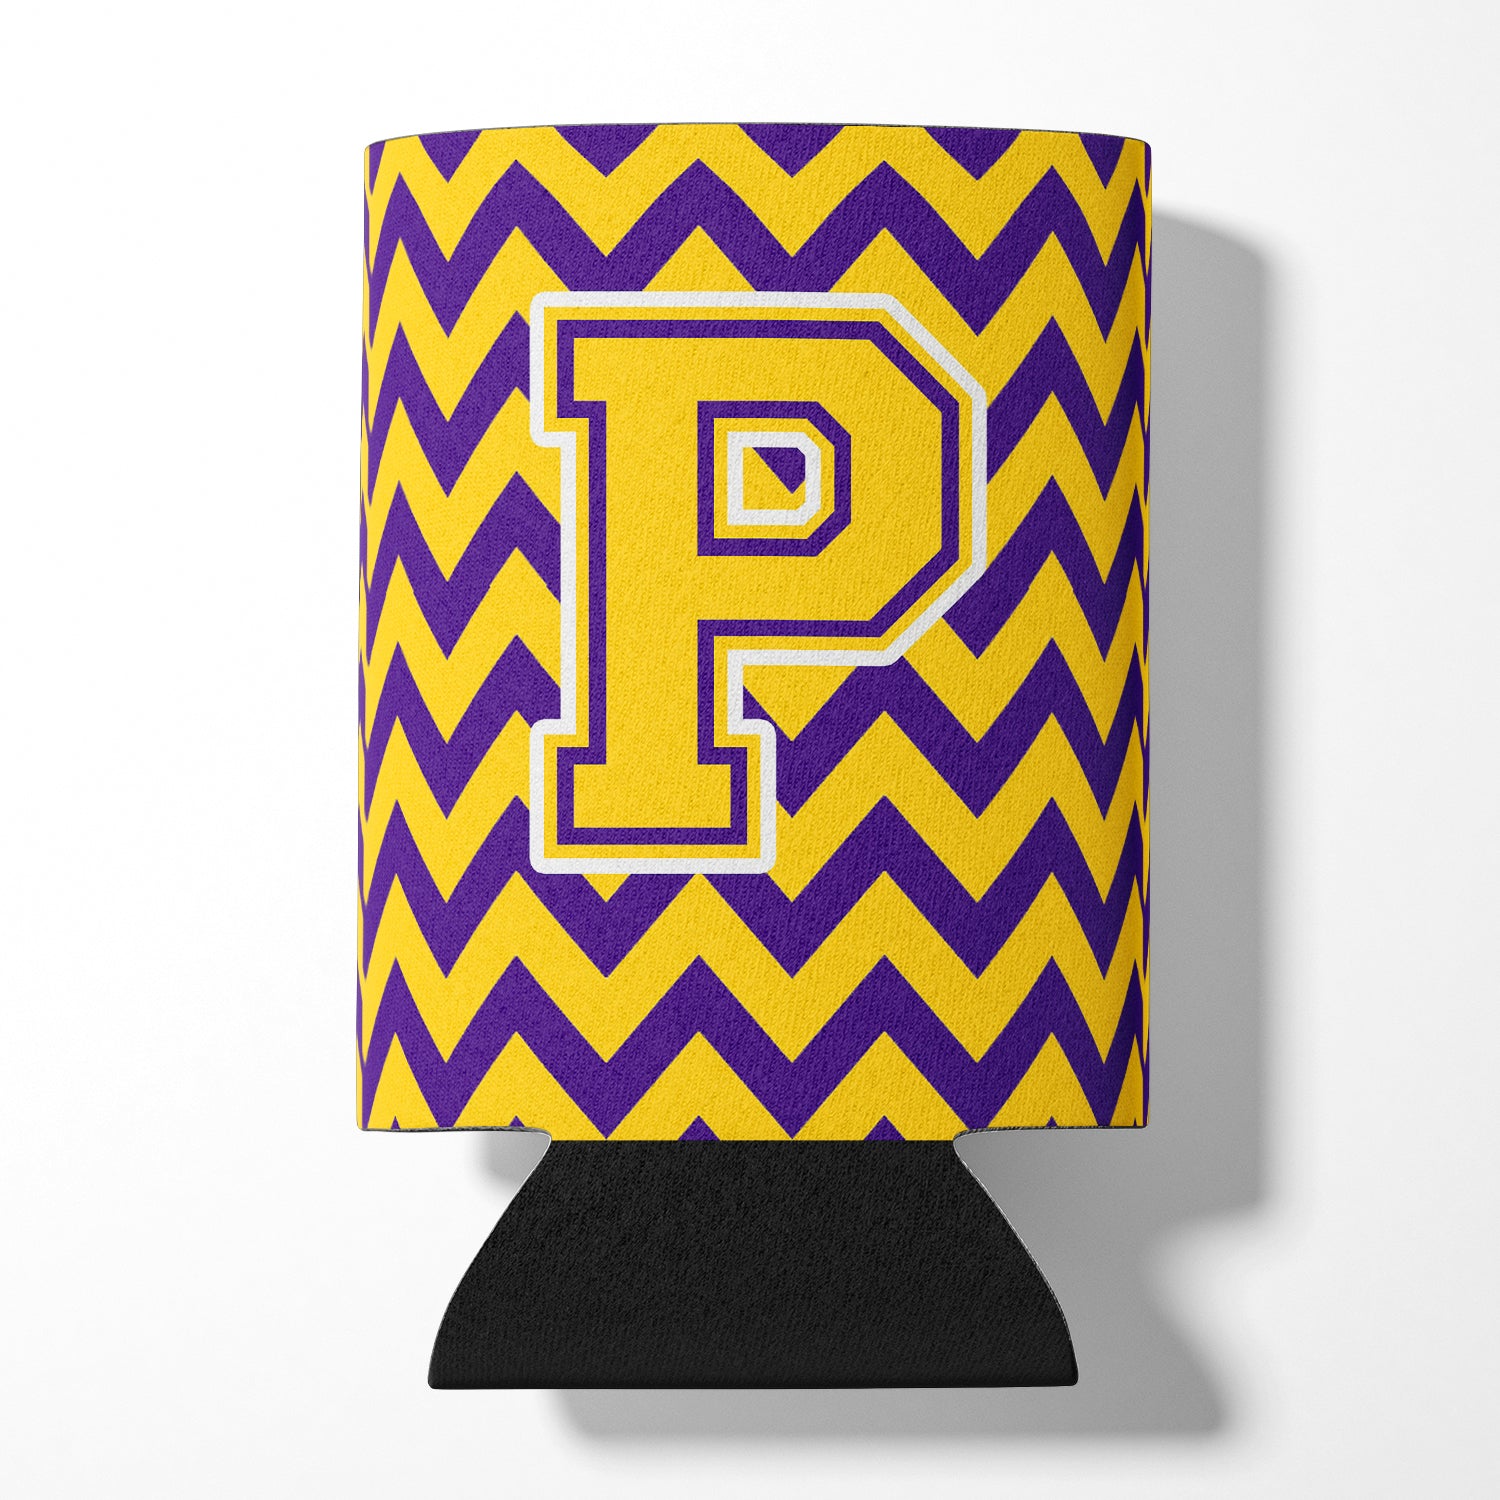 Letter P Chevron Purple and Gold Can or Bottle Hugger CJ1041-PCC